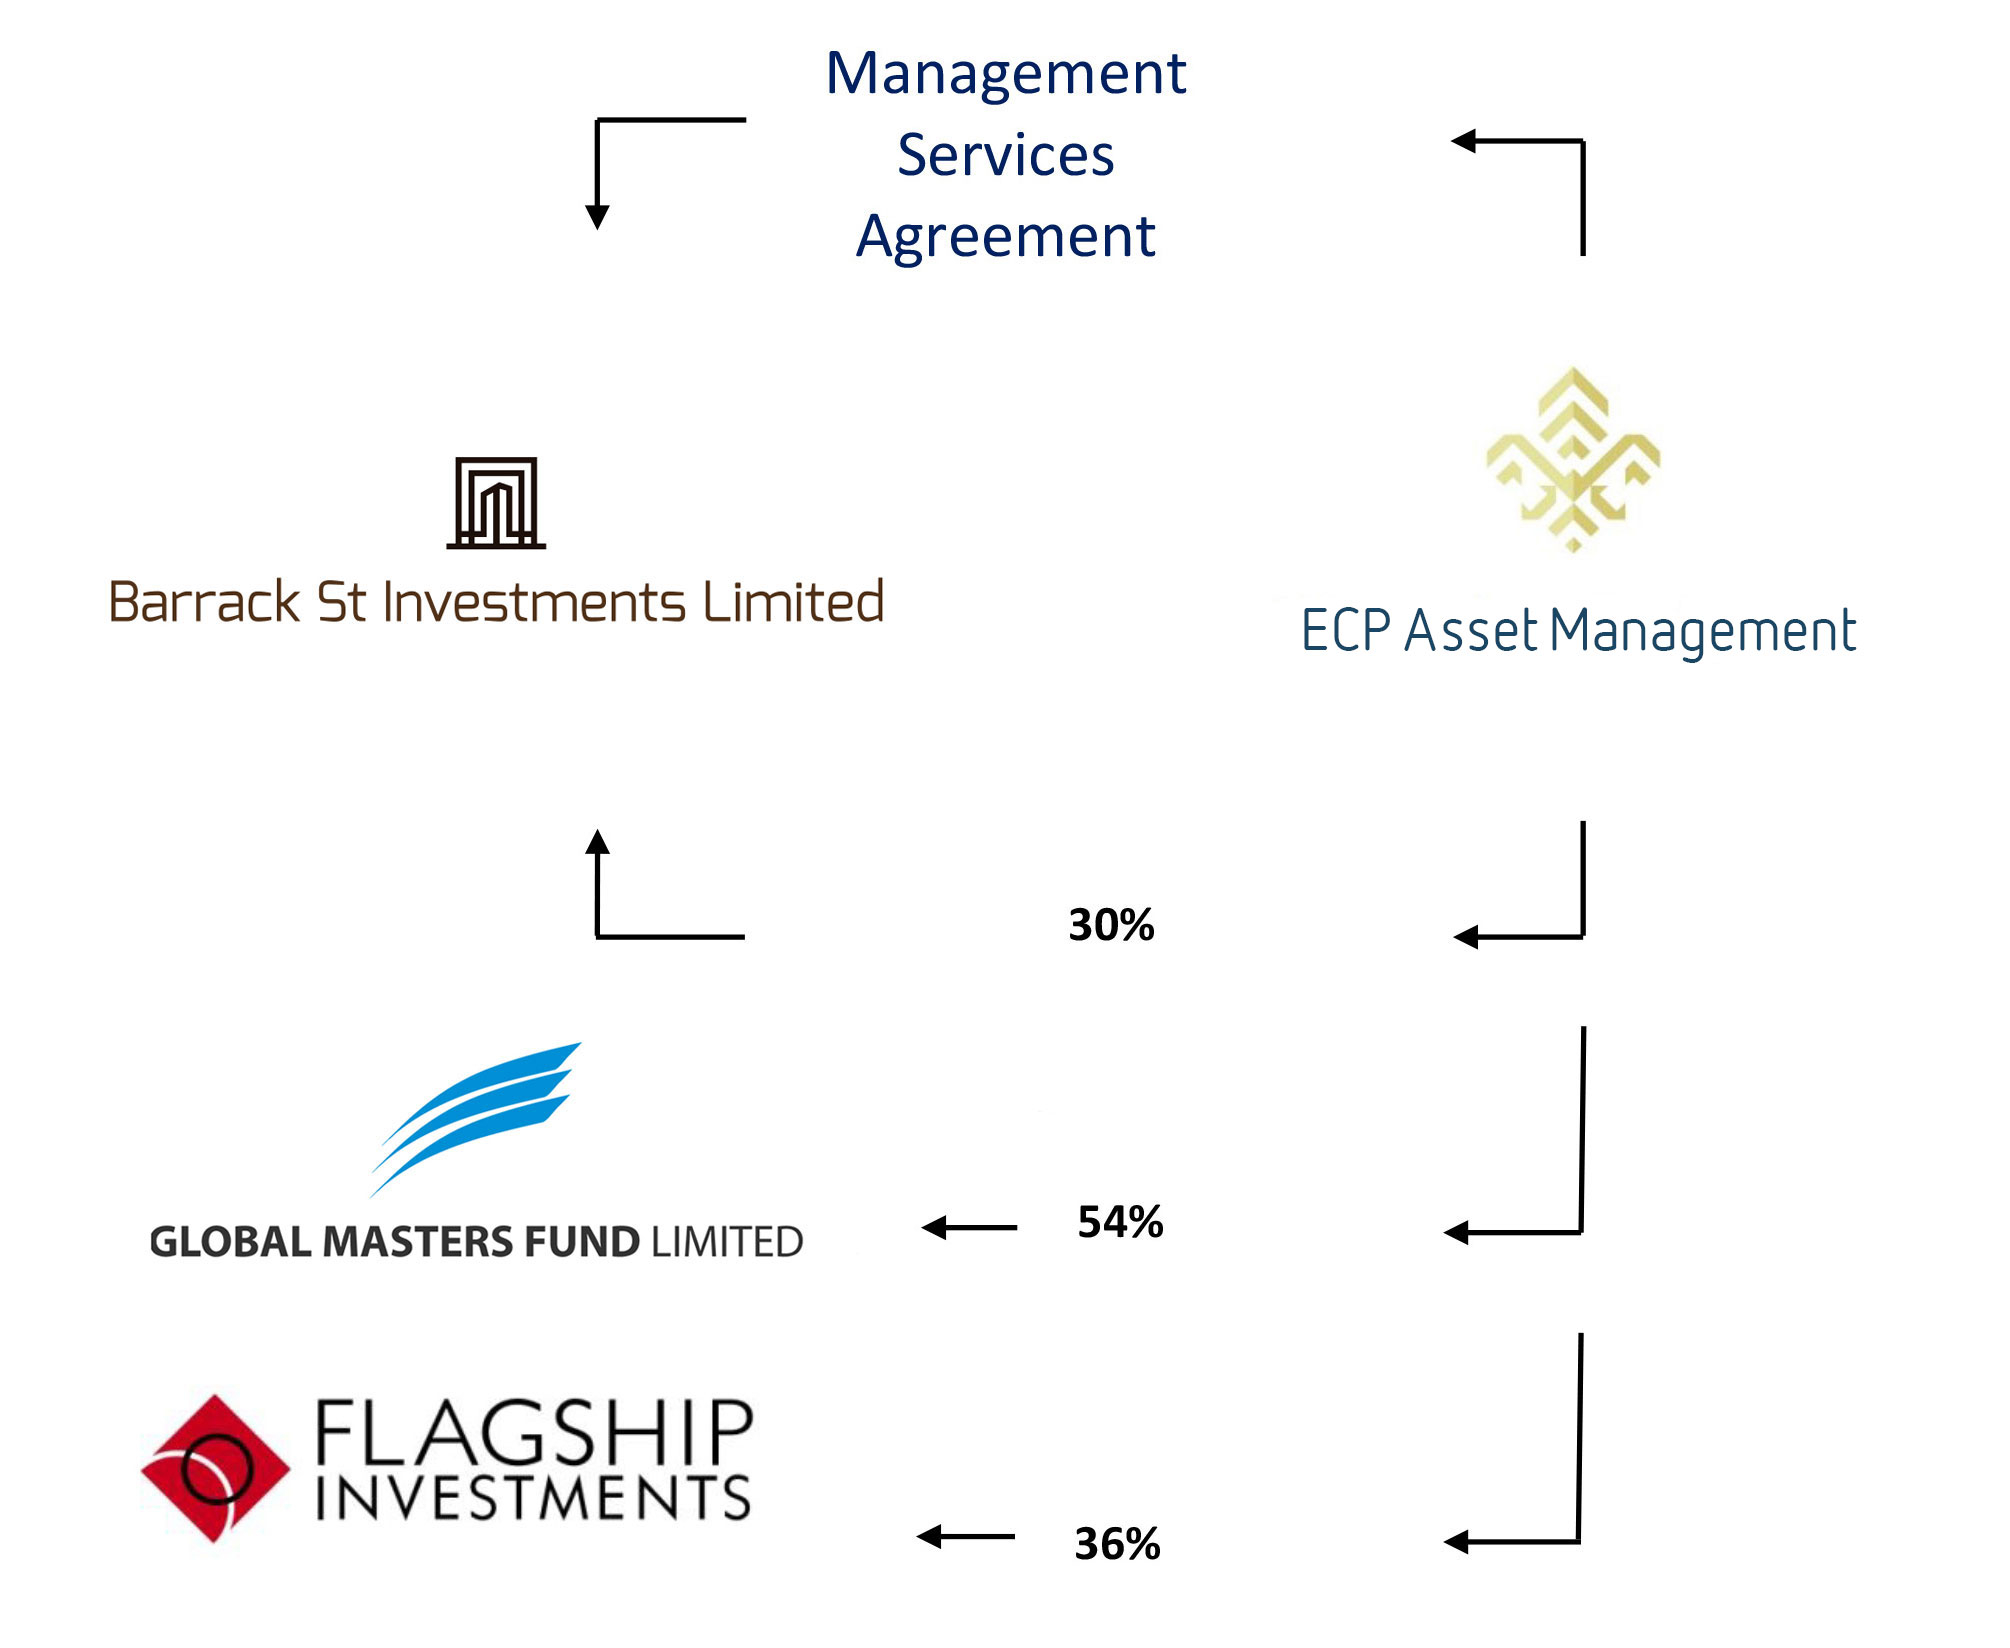 Investment Management Agreement About Barrack St Investment Ltd